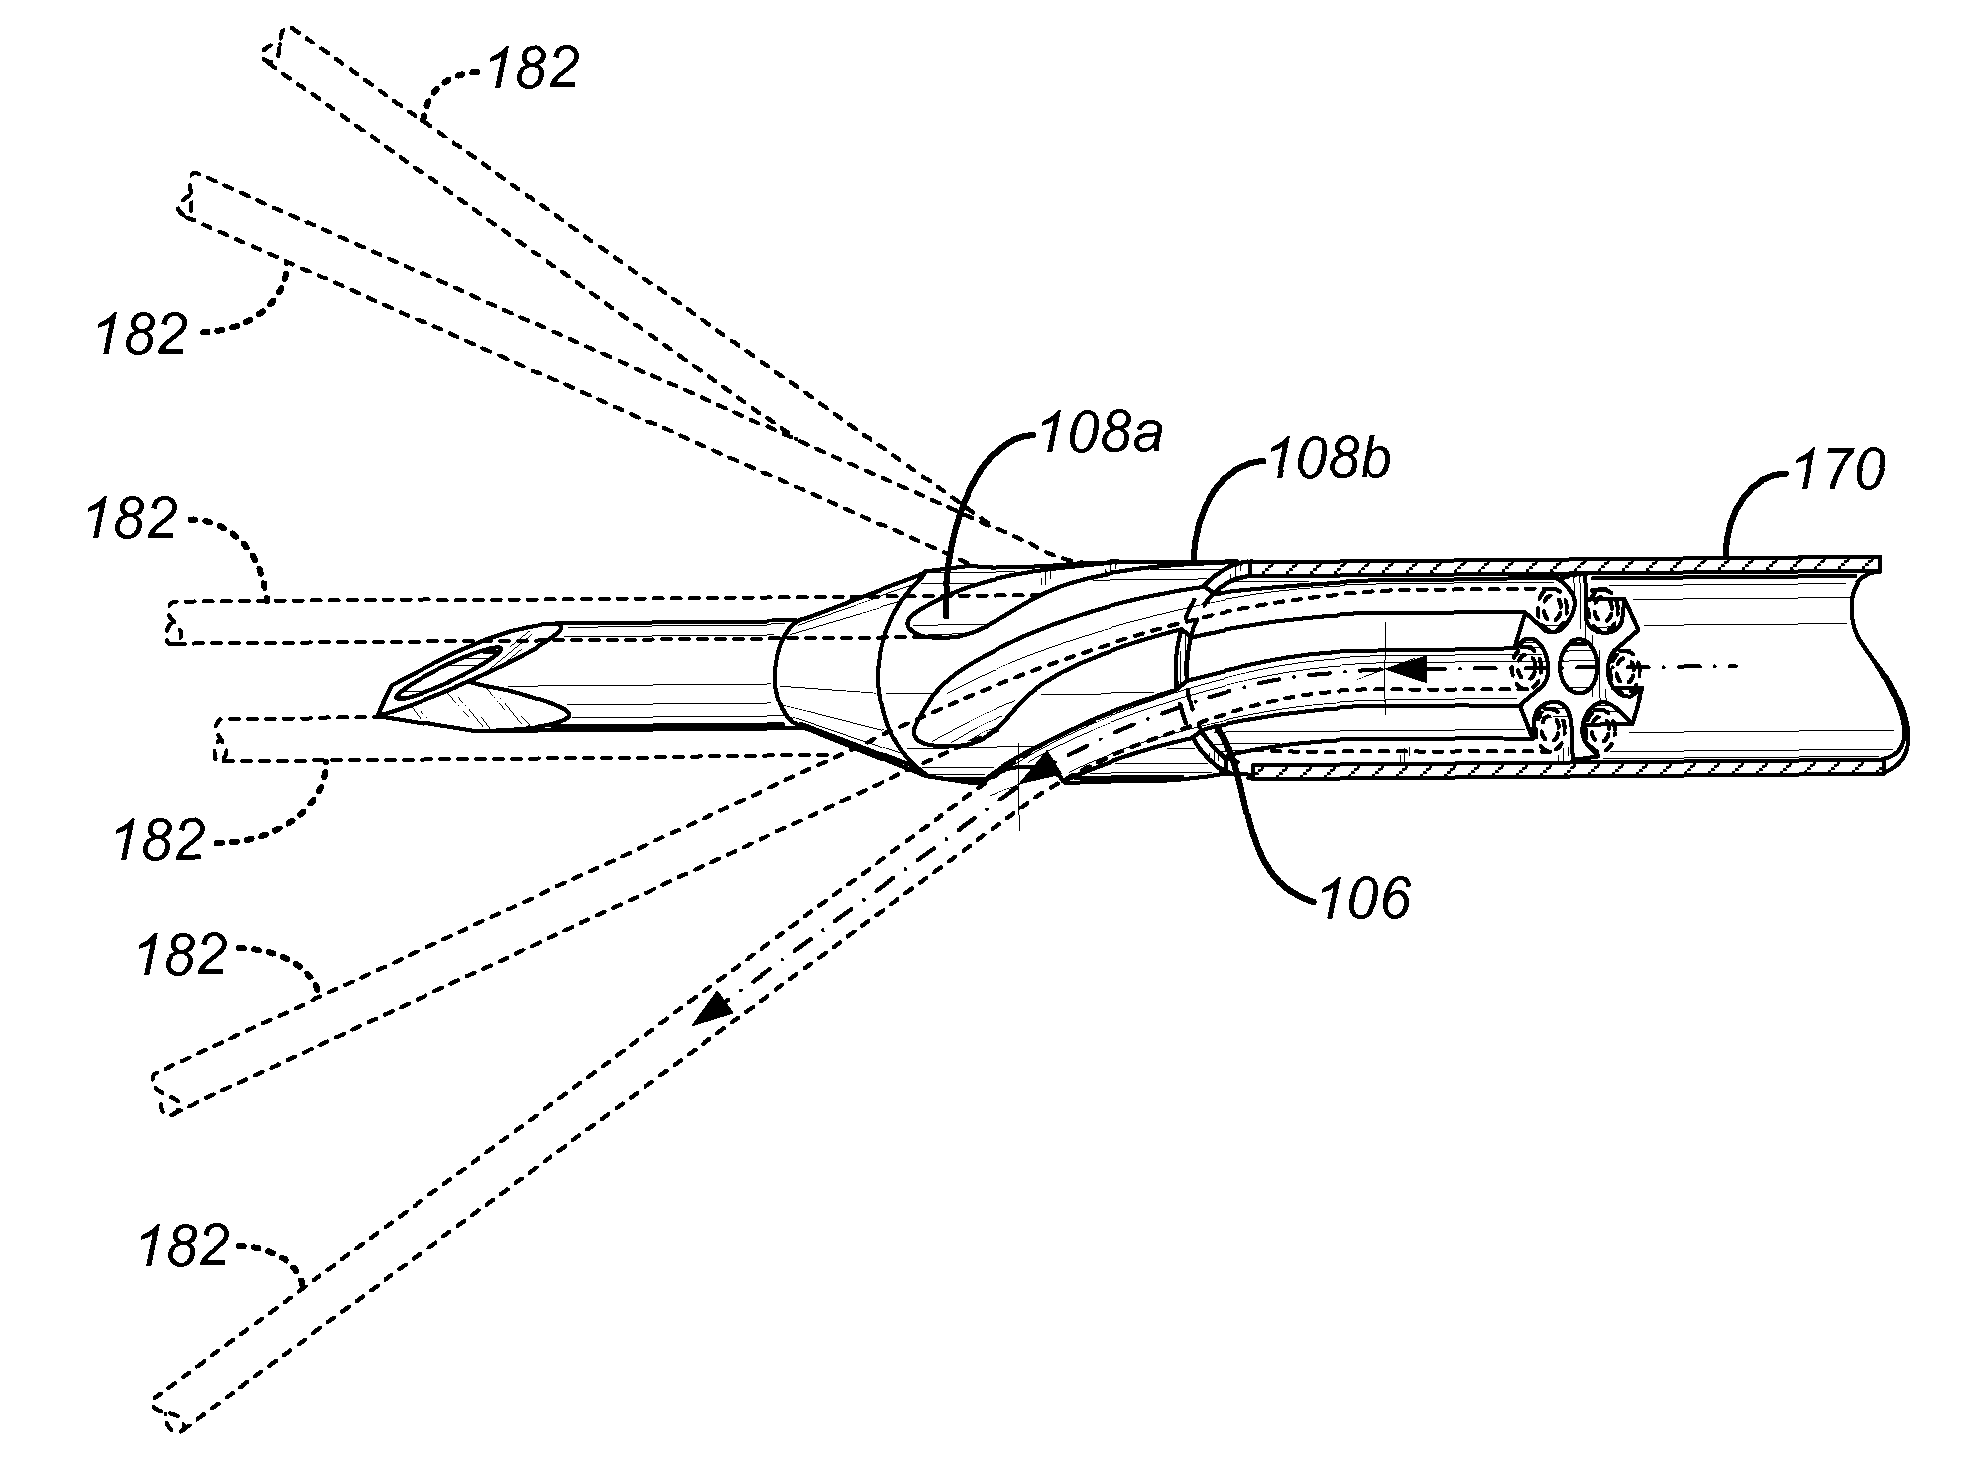 Needle and tine deployment mechanism